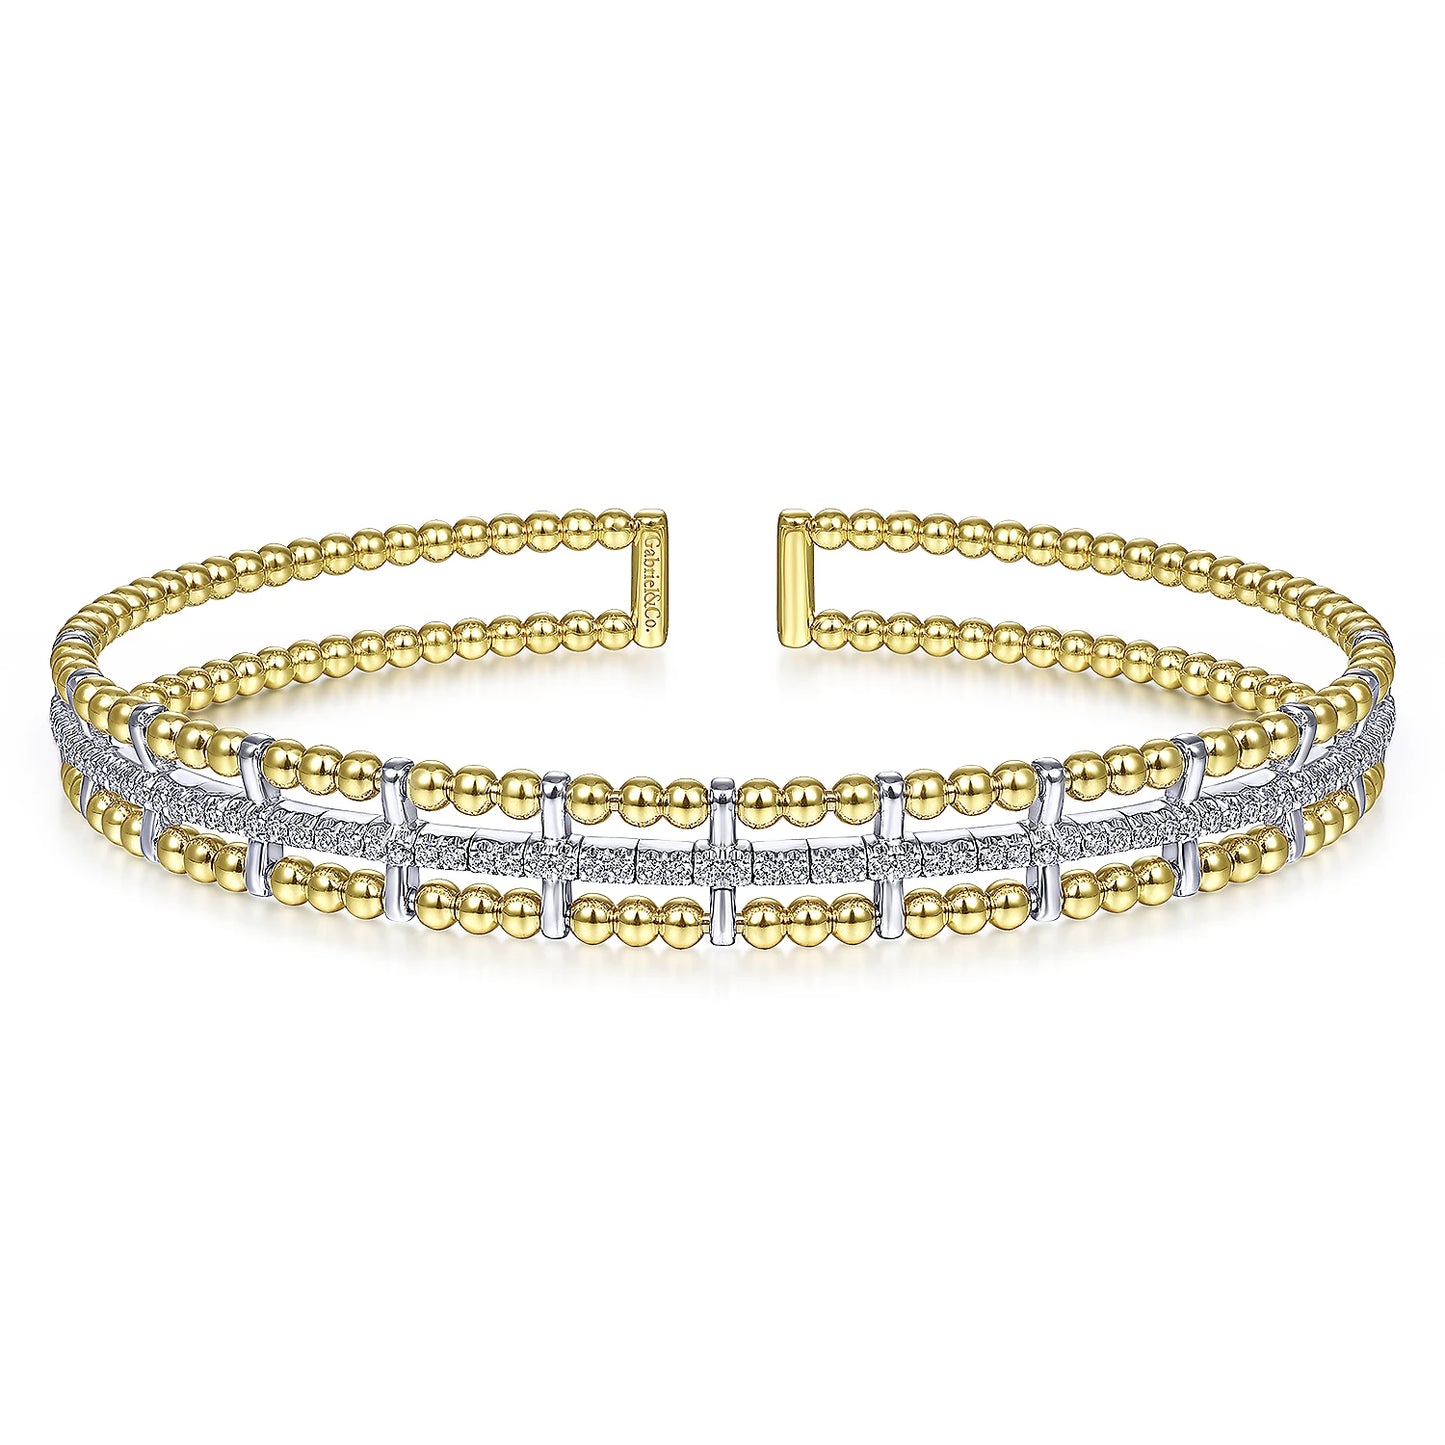 14K Yellow and White Gold Bujukan Cuff Bracelet with Inner Diamond Channel